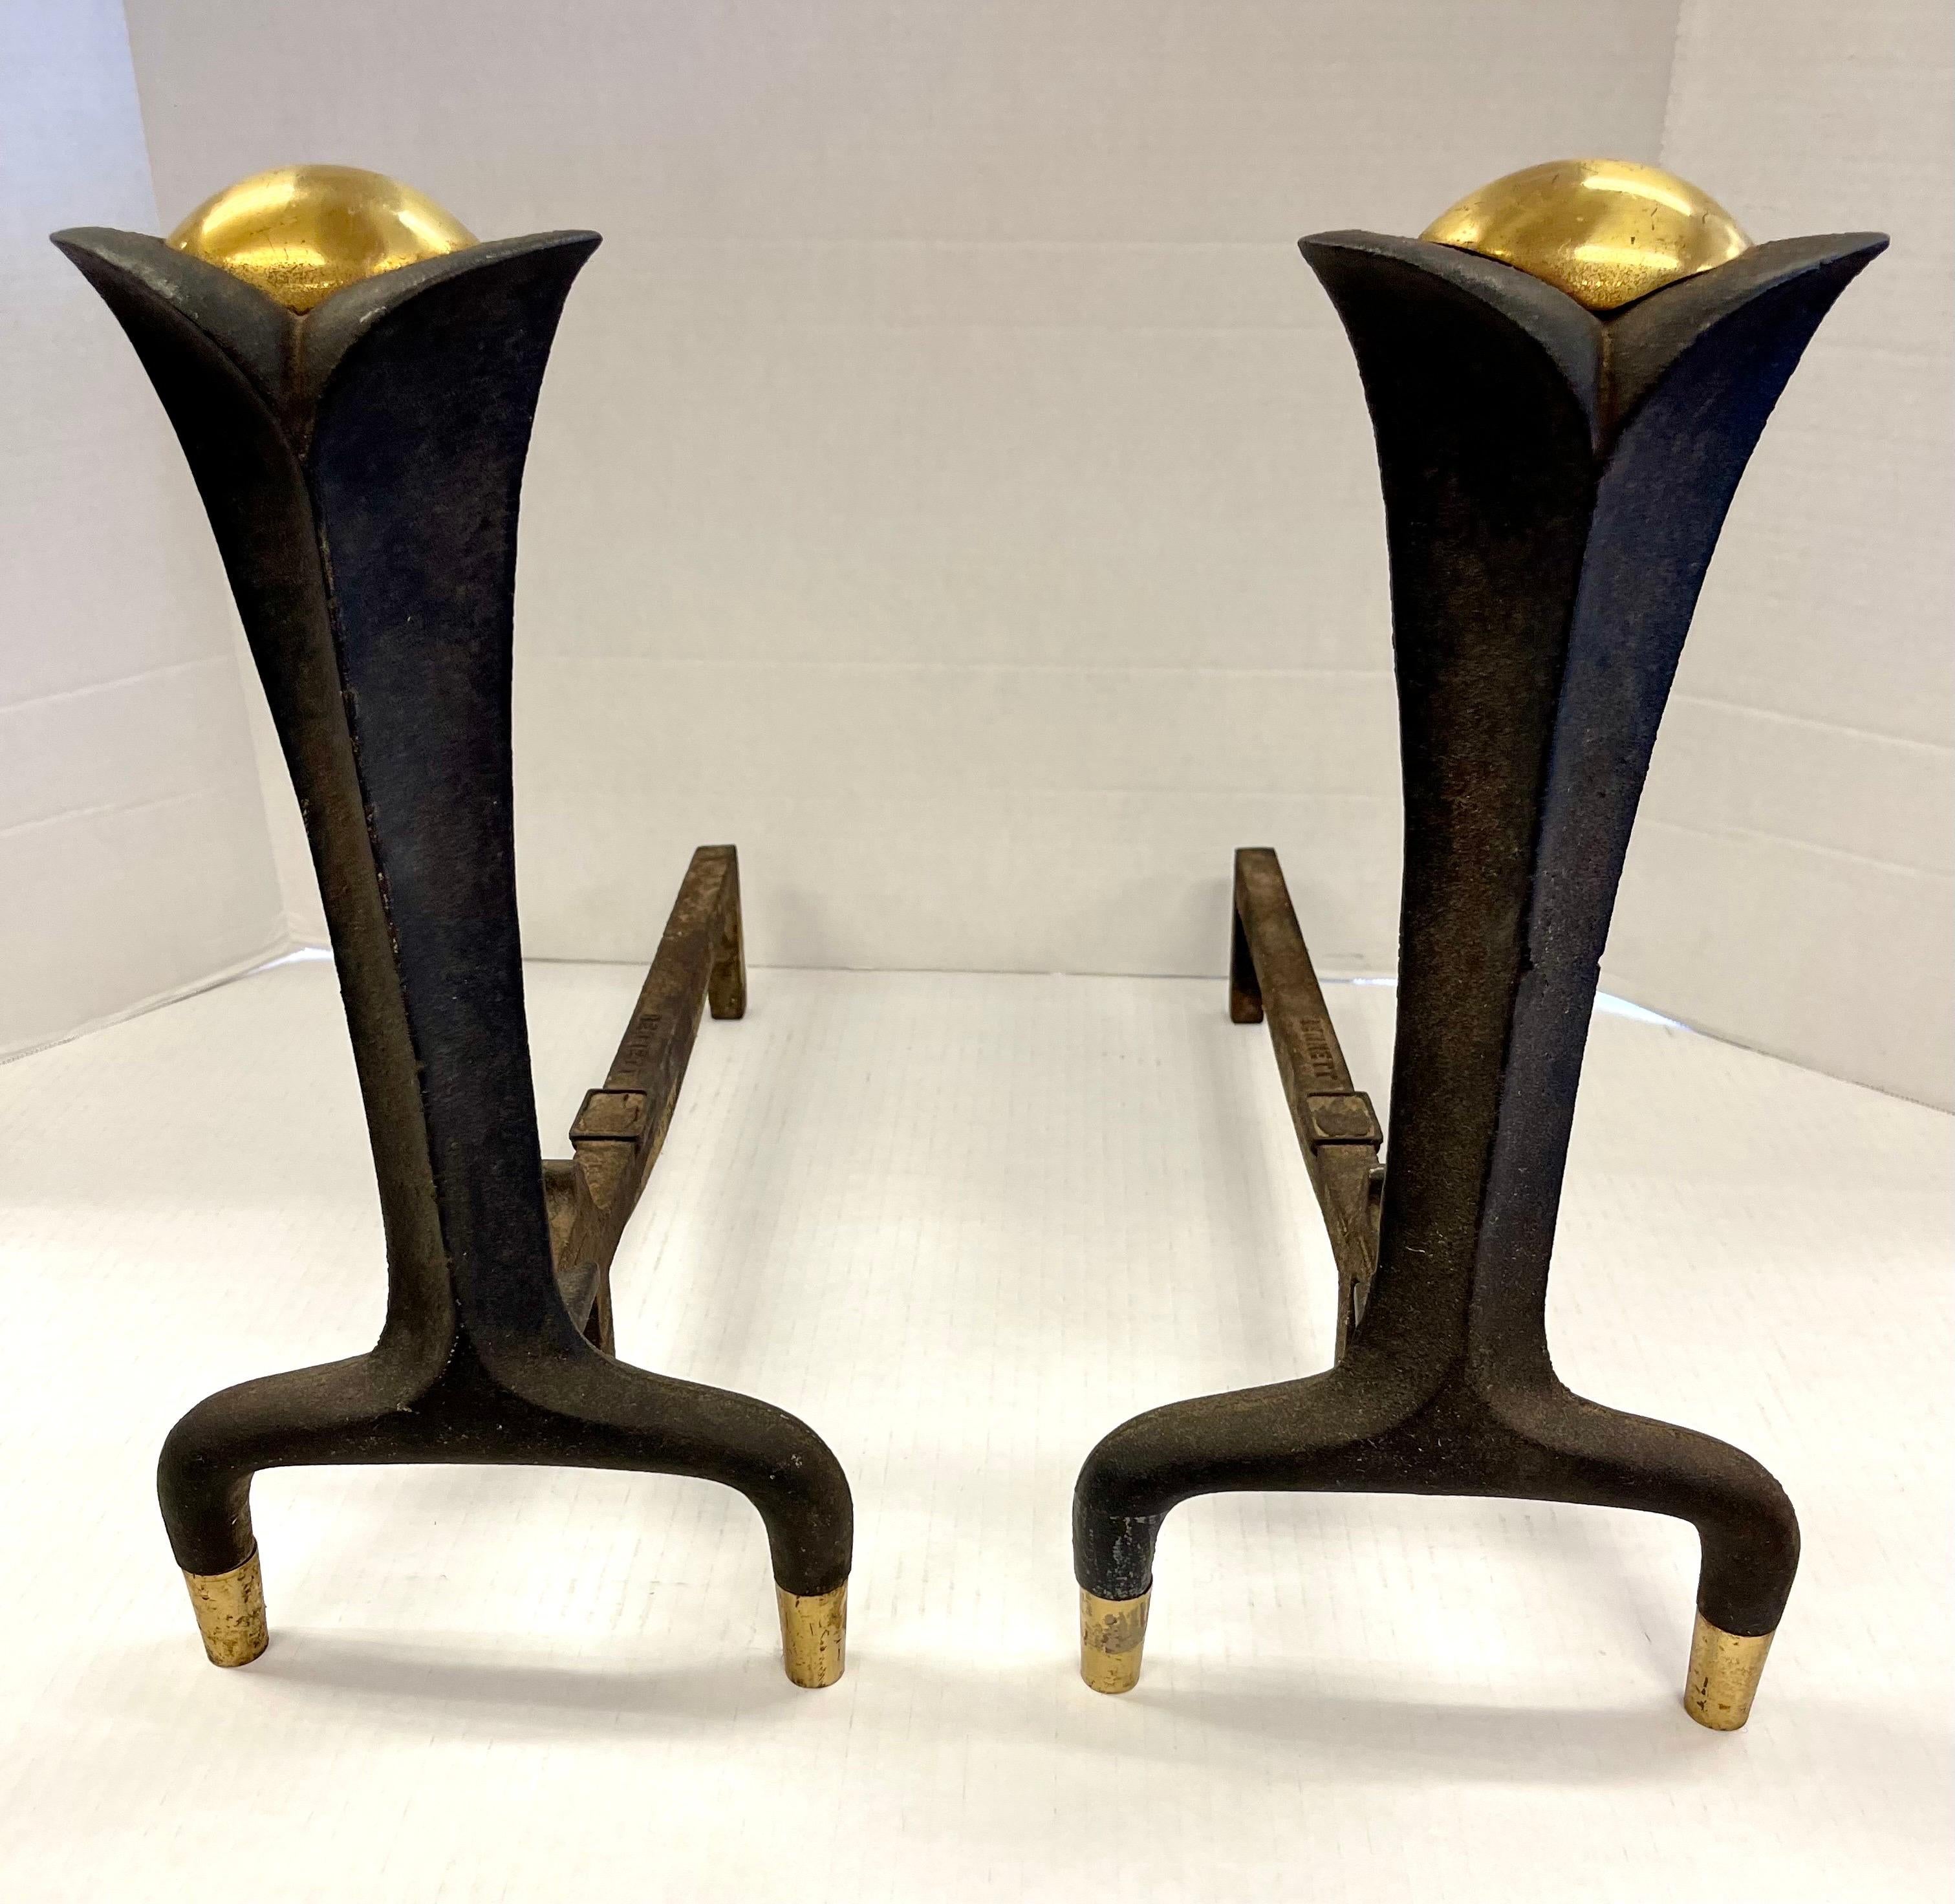 Elegant and rare signed Donald Deskey Bennett cast iron and brass andirons.
Age appropriate wear and gorgeous patina. Brass at top and bottom. Why not own the best?.